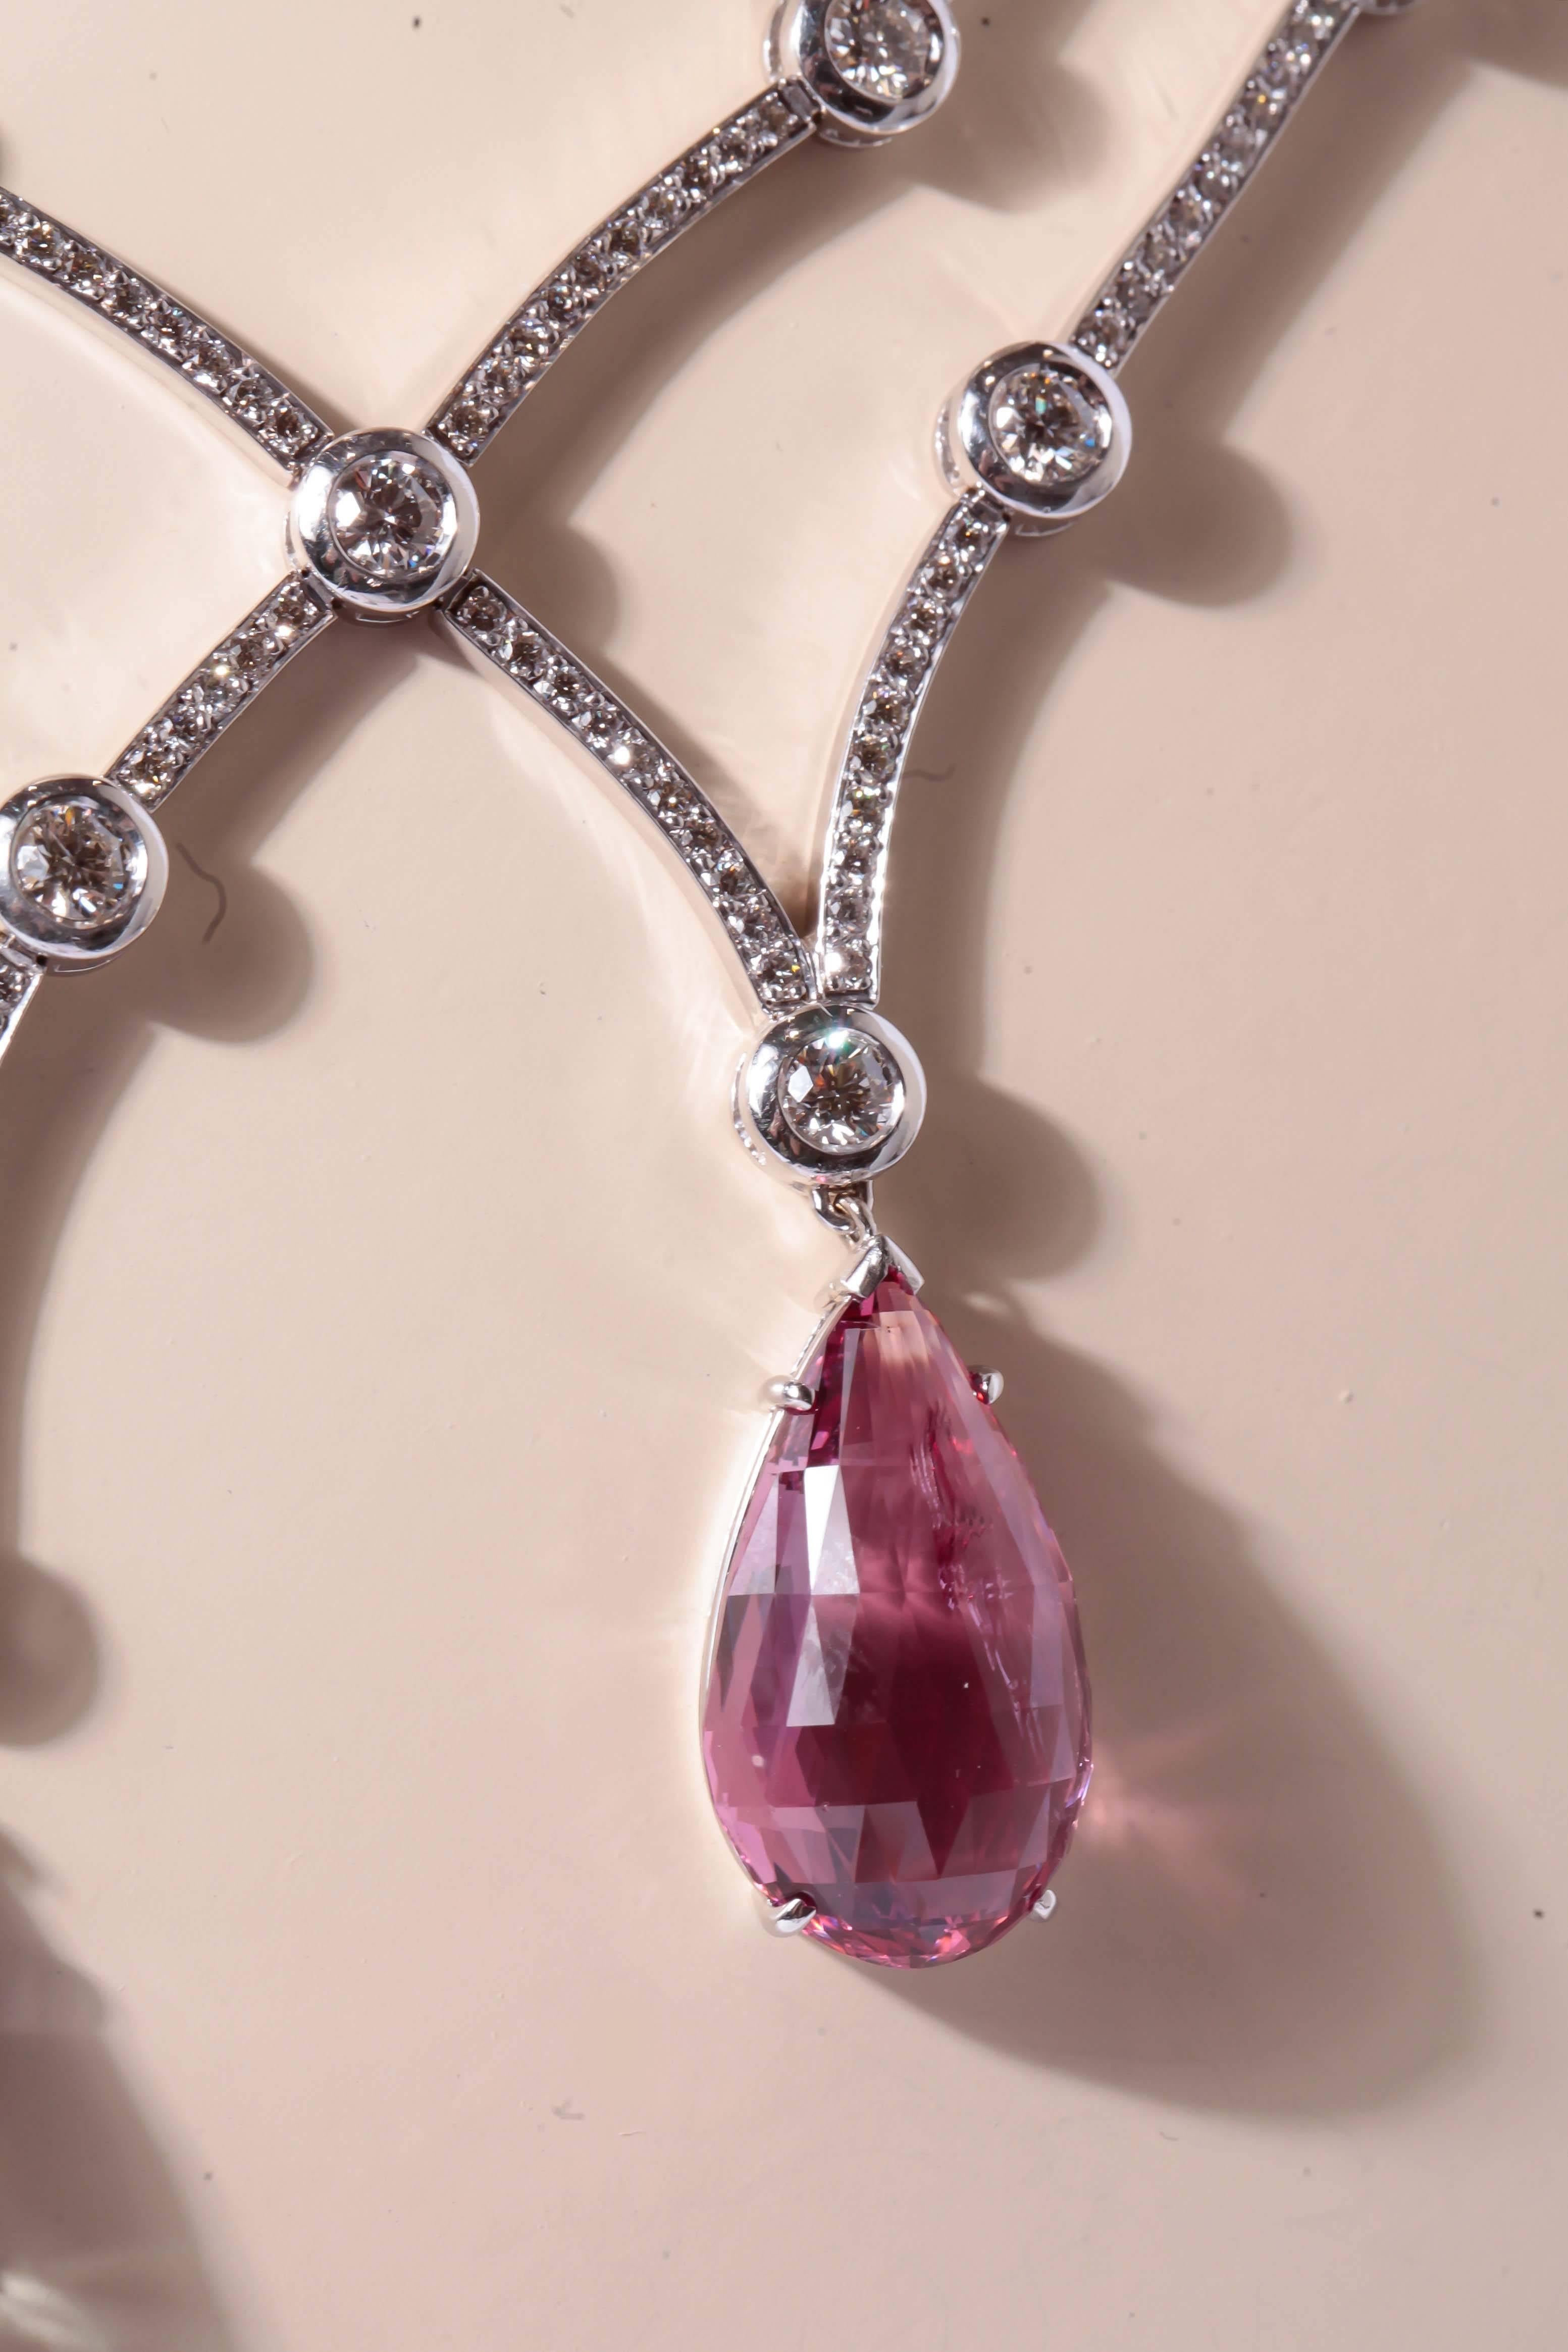 Designer Neil Joseph necklace appointed with  8.14 carats total weight of VS2 clarity, H color, bezel set diamonds.   This necklace also consists of one
pear shape faceted blue saphire and one pink pear shaped spinel. The total weight for the two